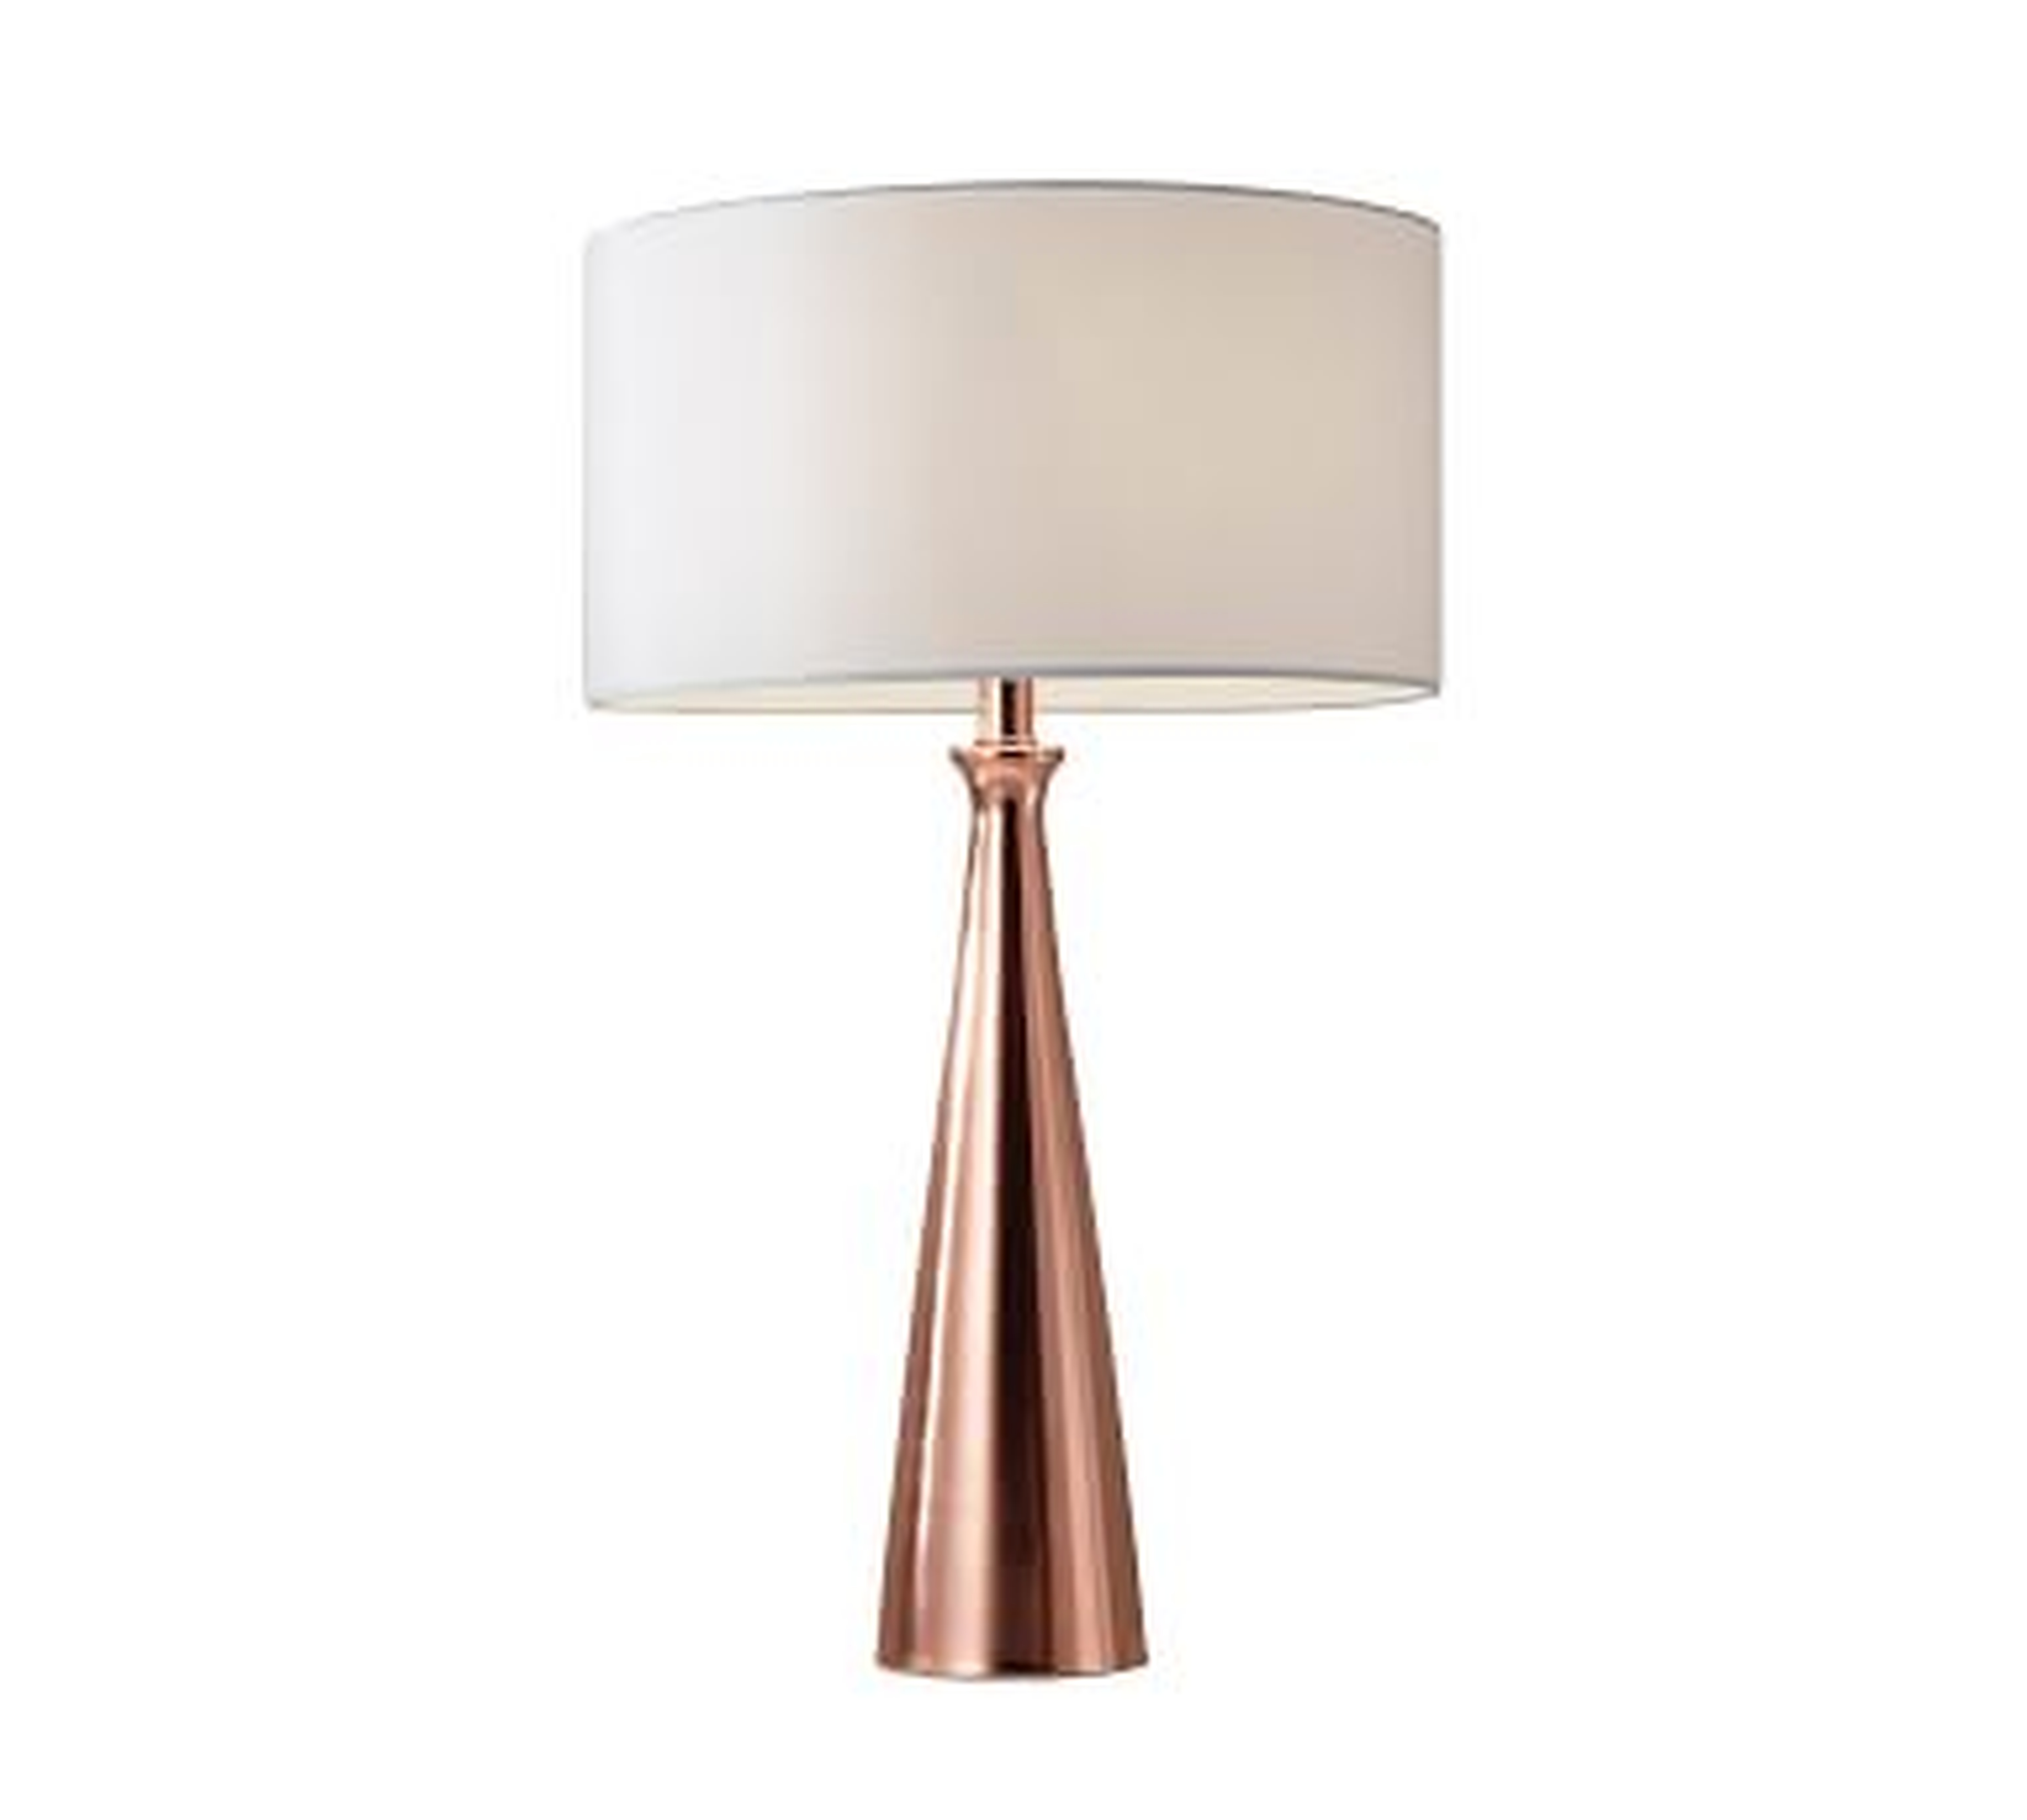 Barclay Table Lamp, Copper - Pottery Barn